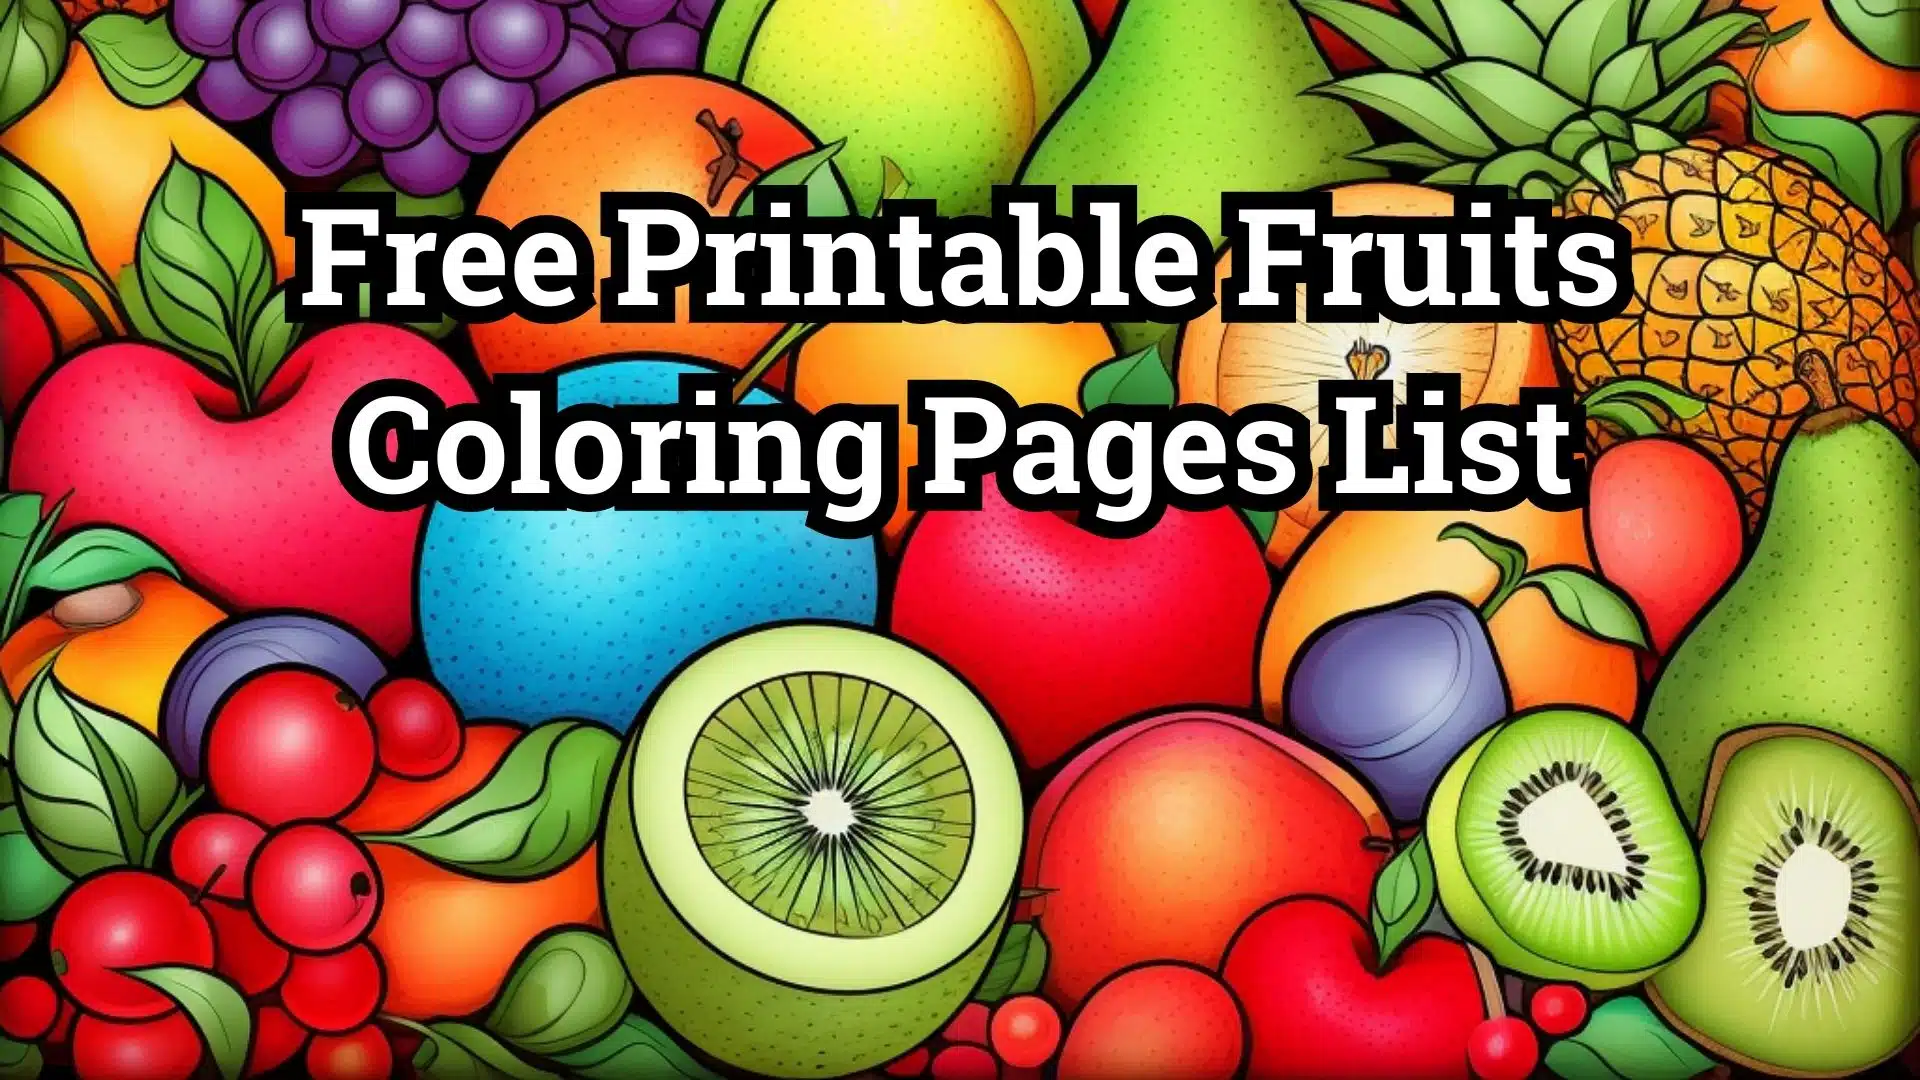 Free Printable Fruits Coloring Pages List